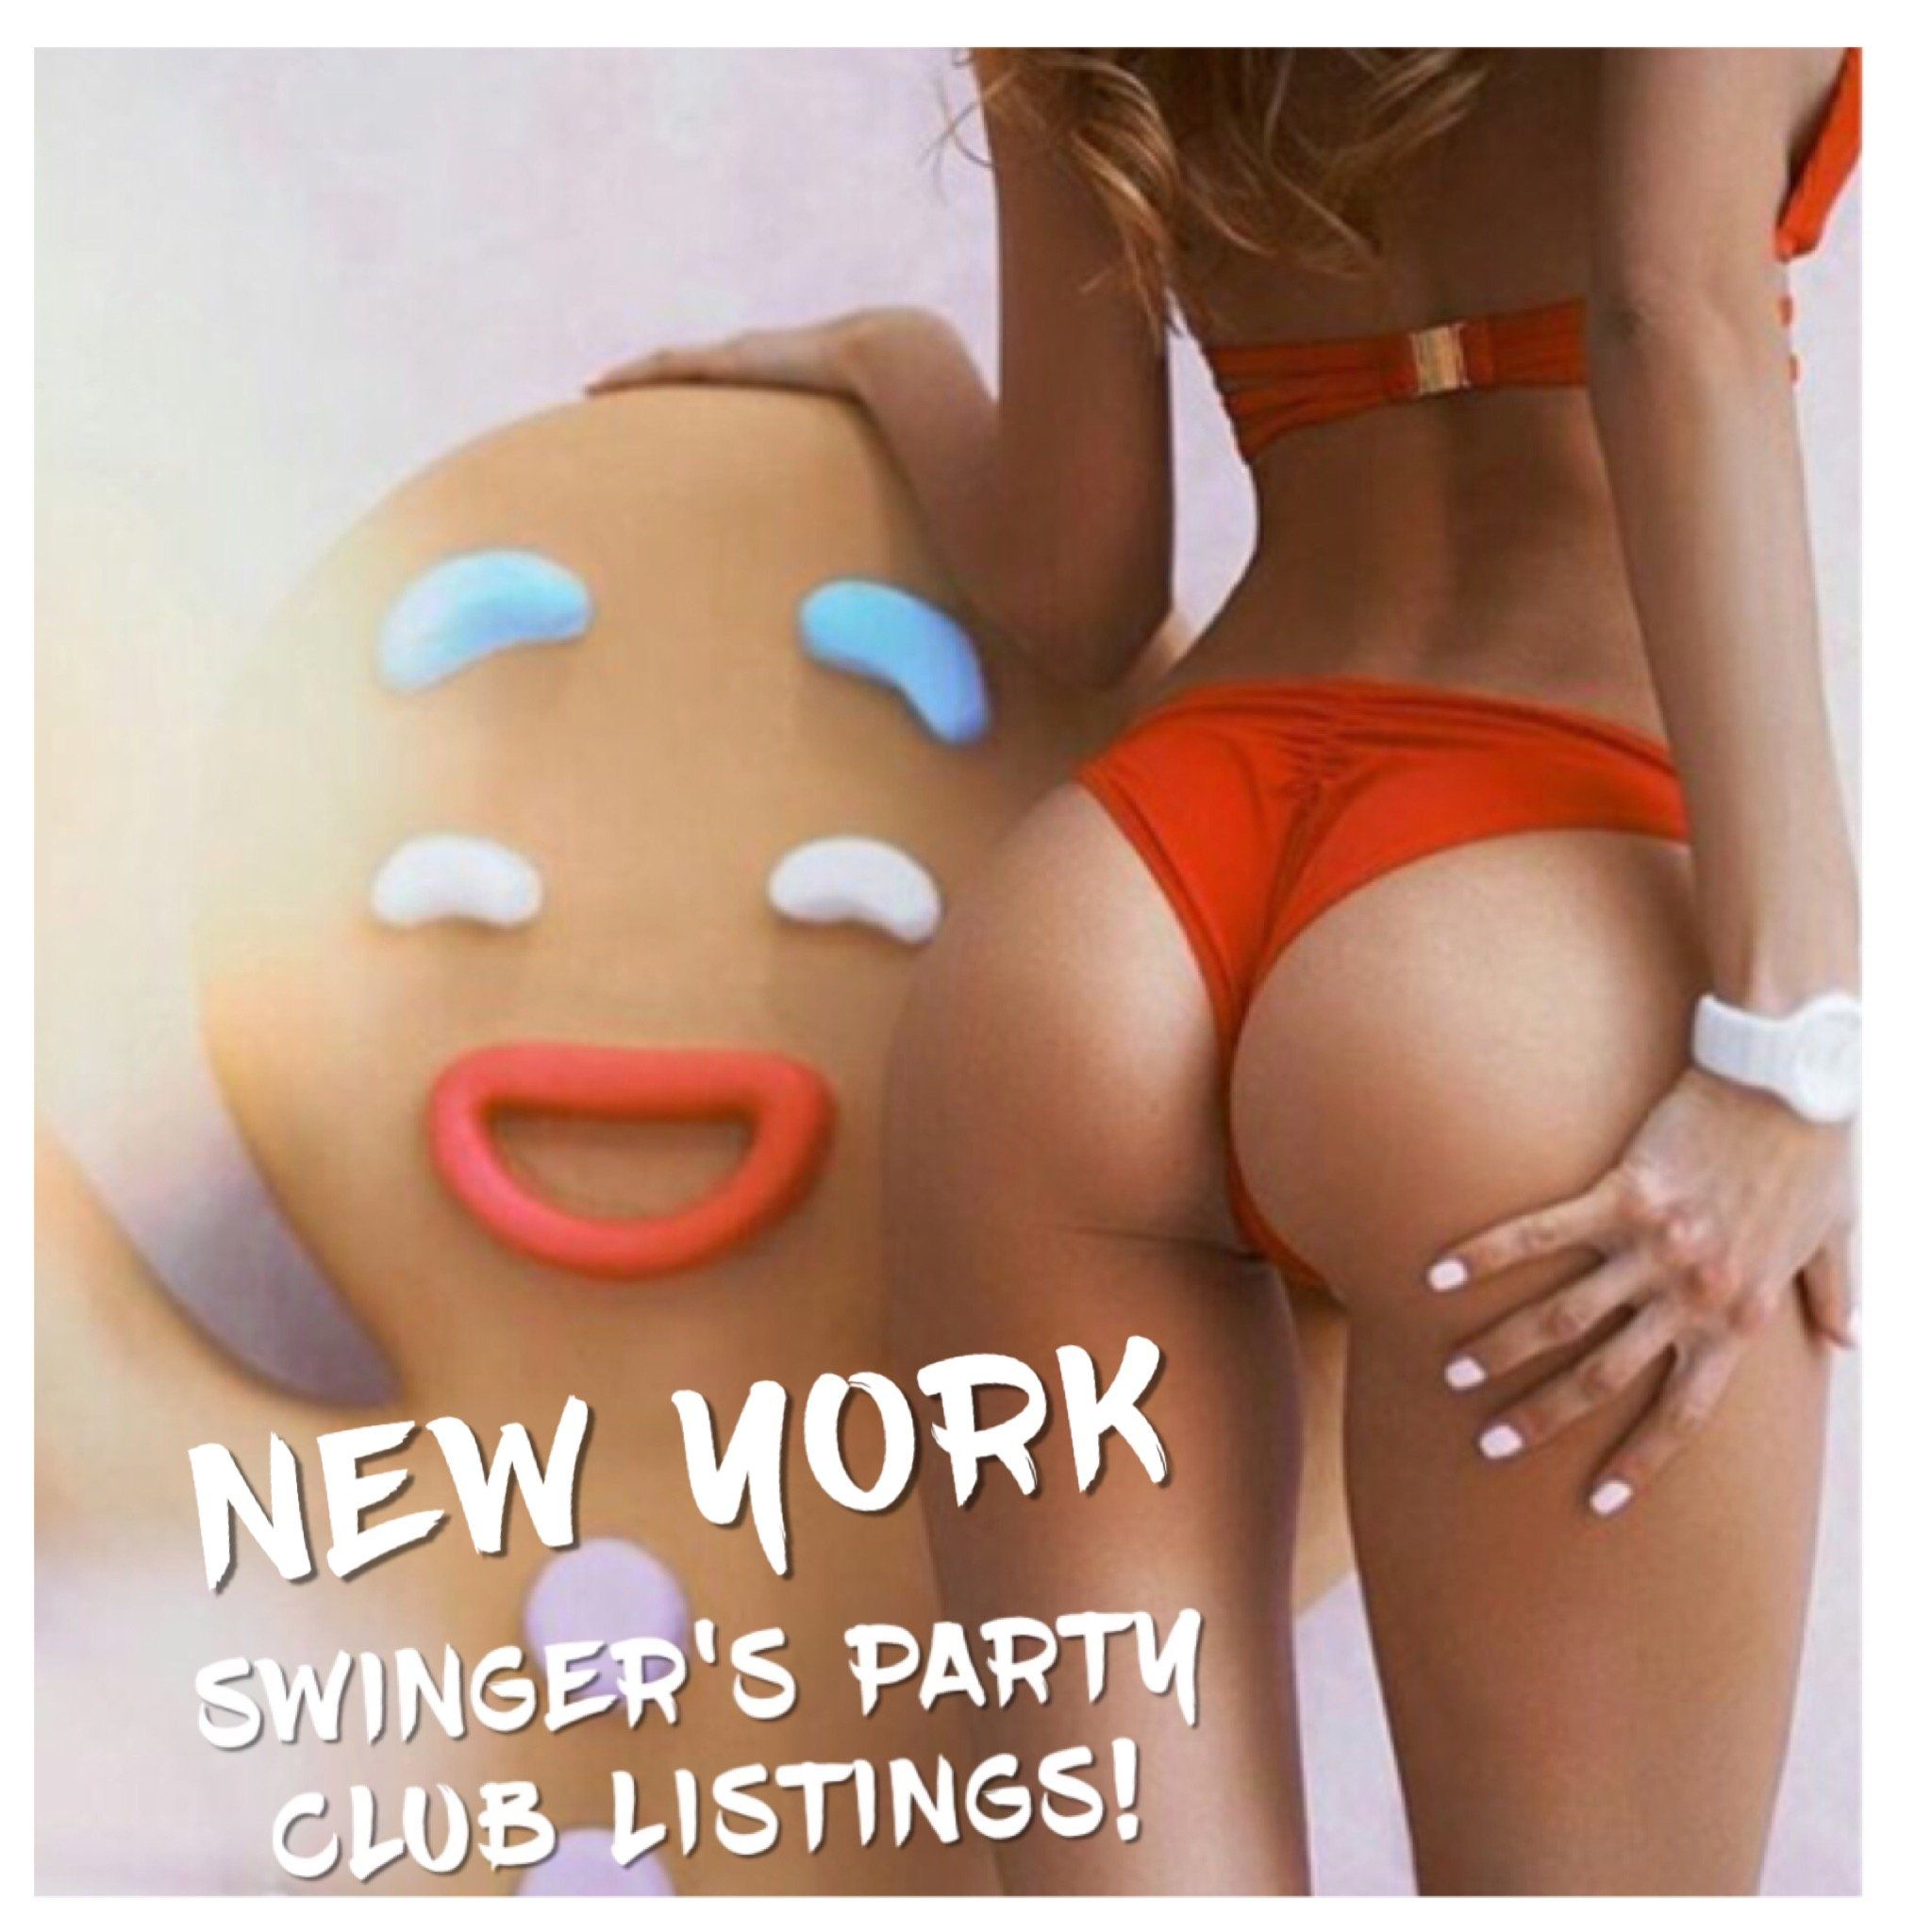 Parallax reccomend Swinger on premise clubs newyork